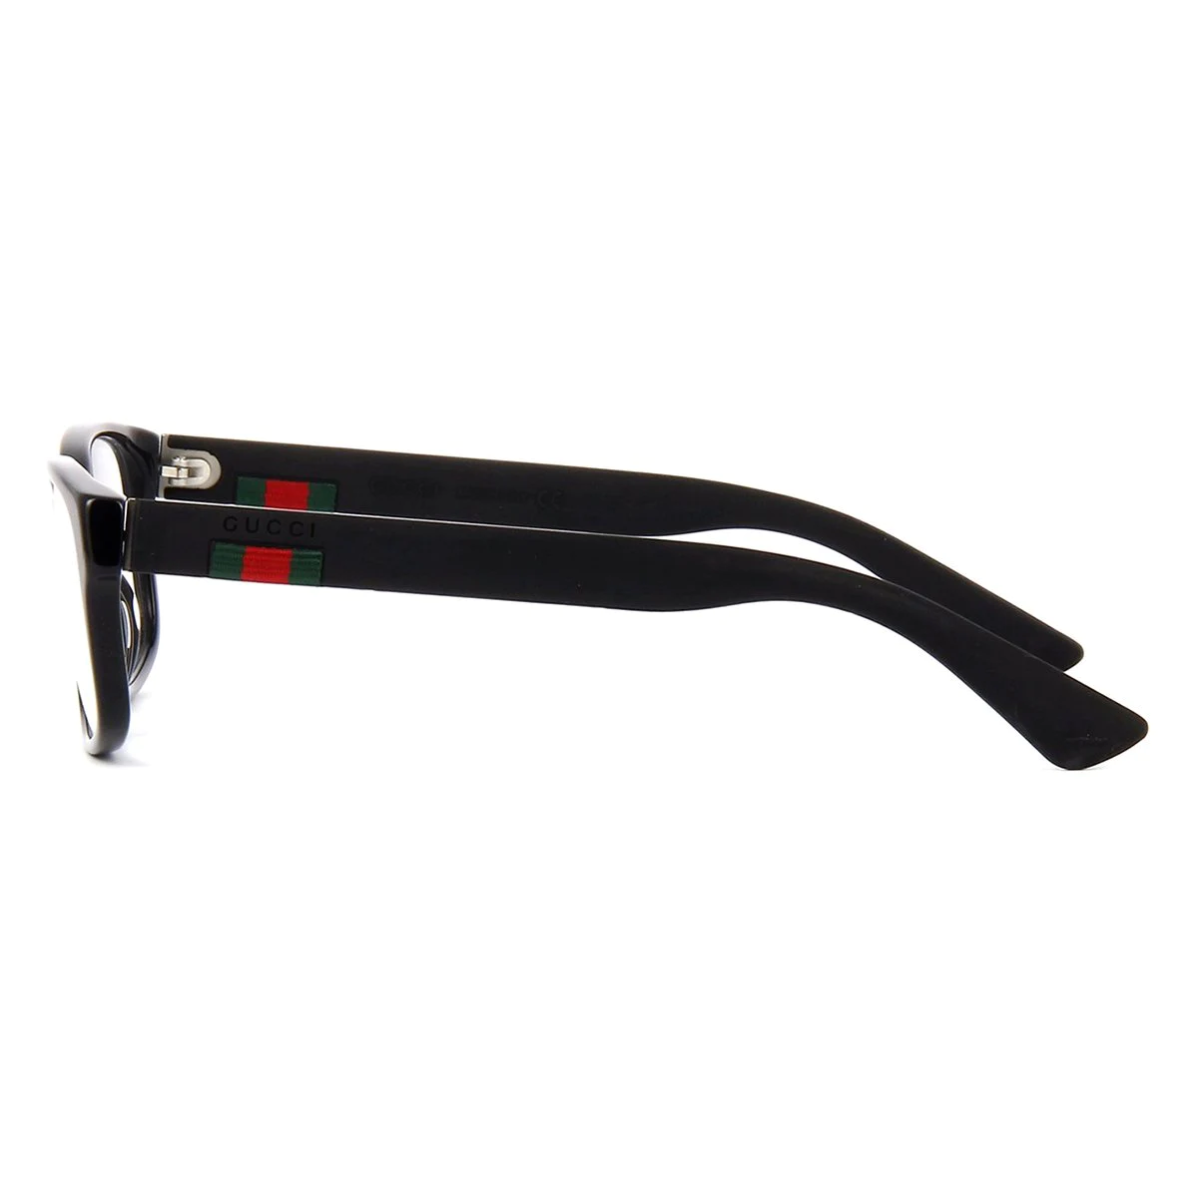 "Premium Gucci Eyewear - Shop the Latest Gucci 0012O Men's Spectacle Frame at Optorium."